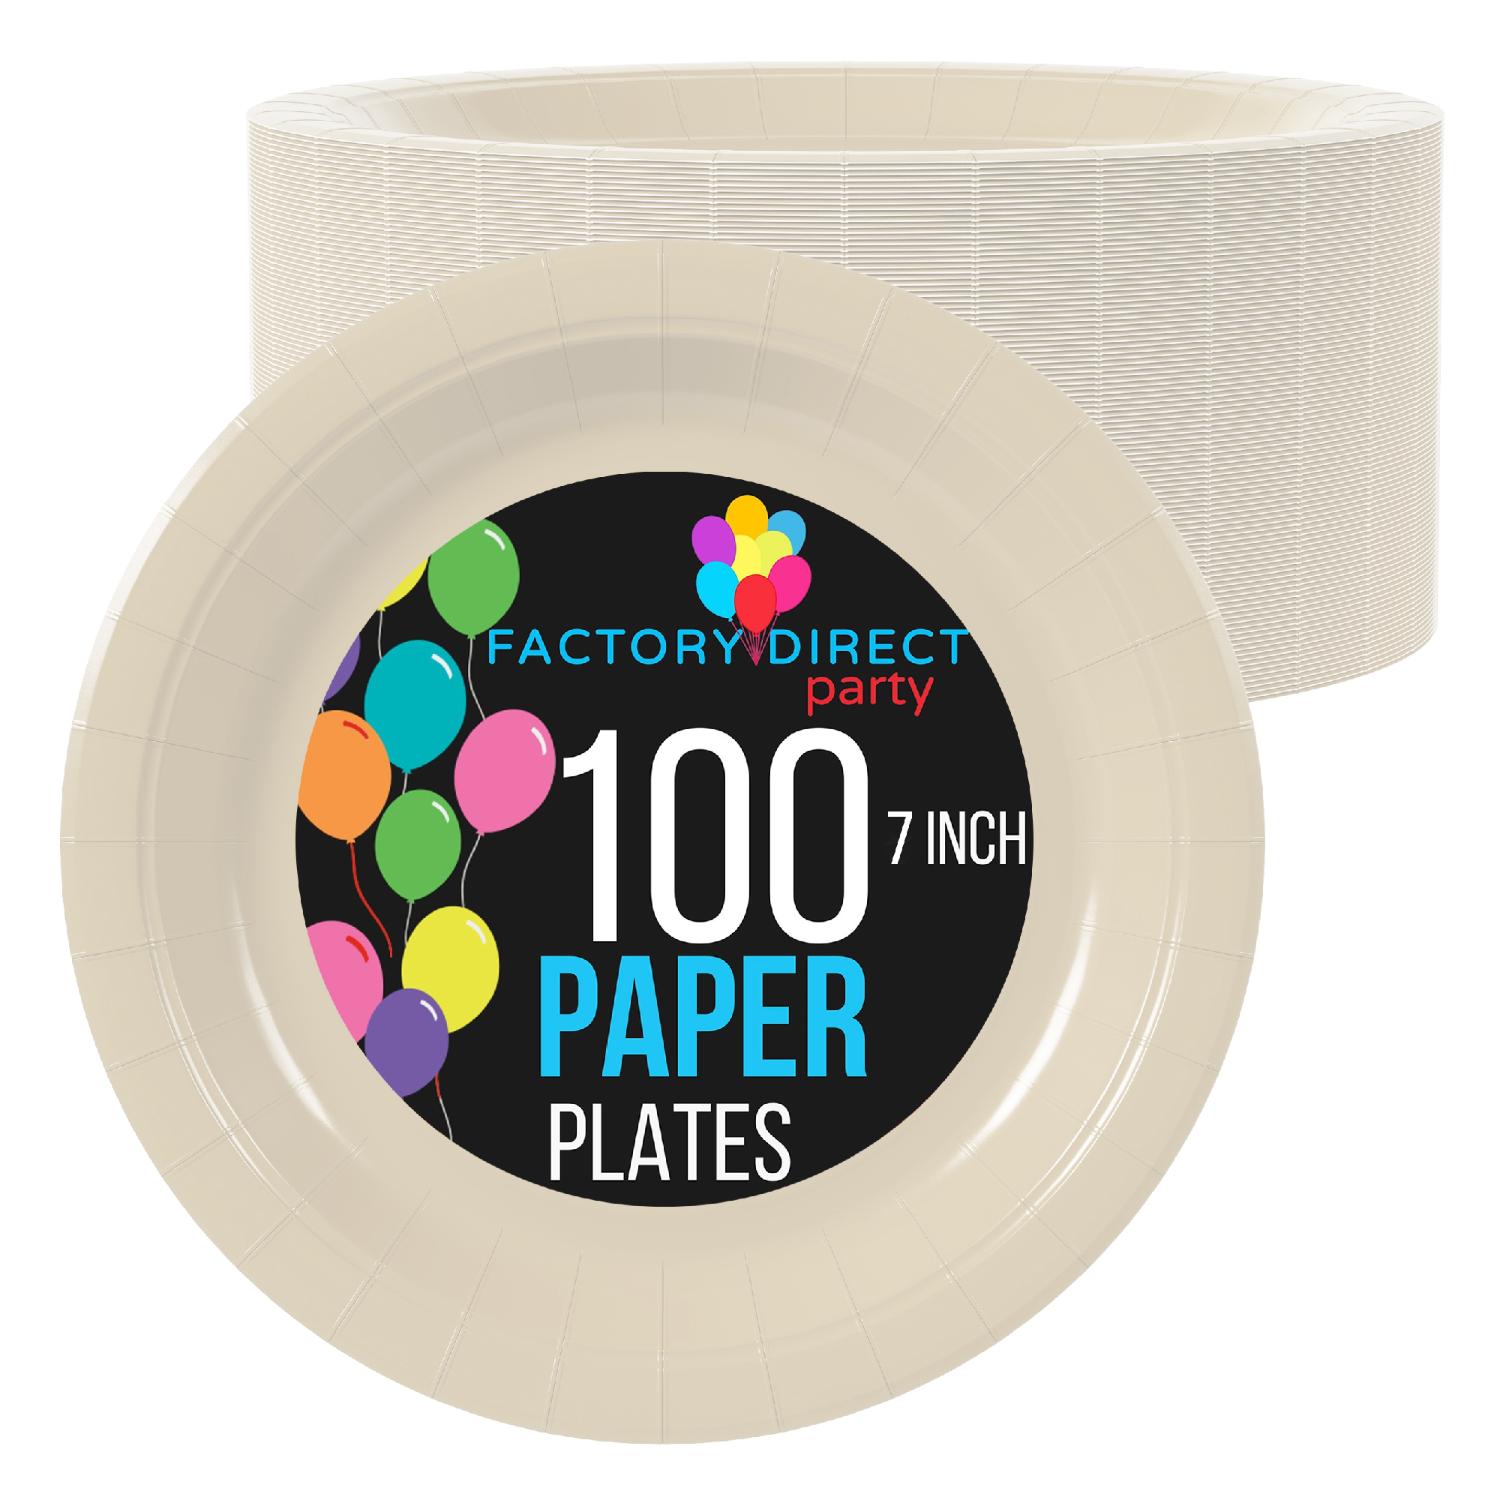 7 In. Ivory Paper Plates - 100 Ct.